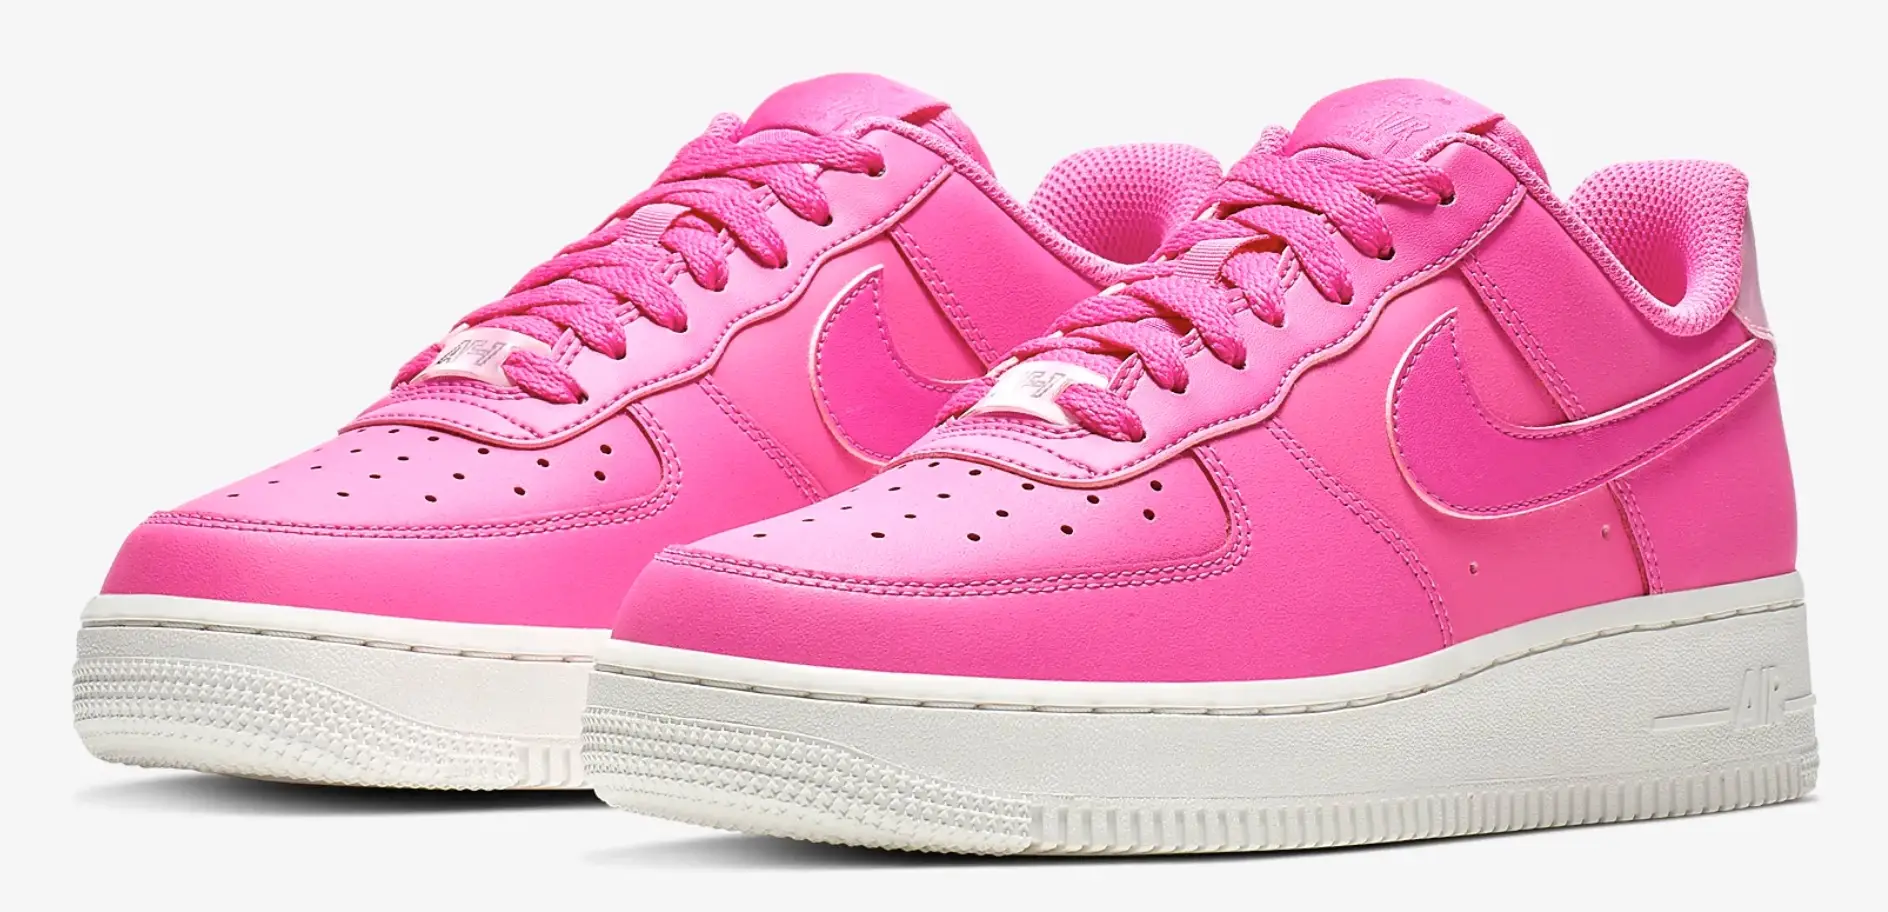 Brighten Up With These 5 Pink Sneaker Styles At Nike Right Now | The ...